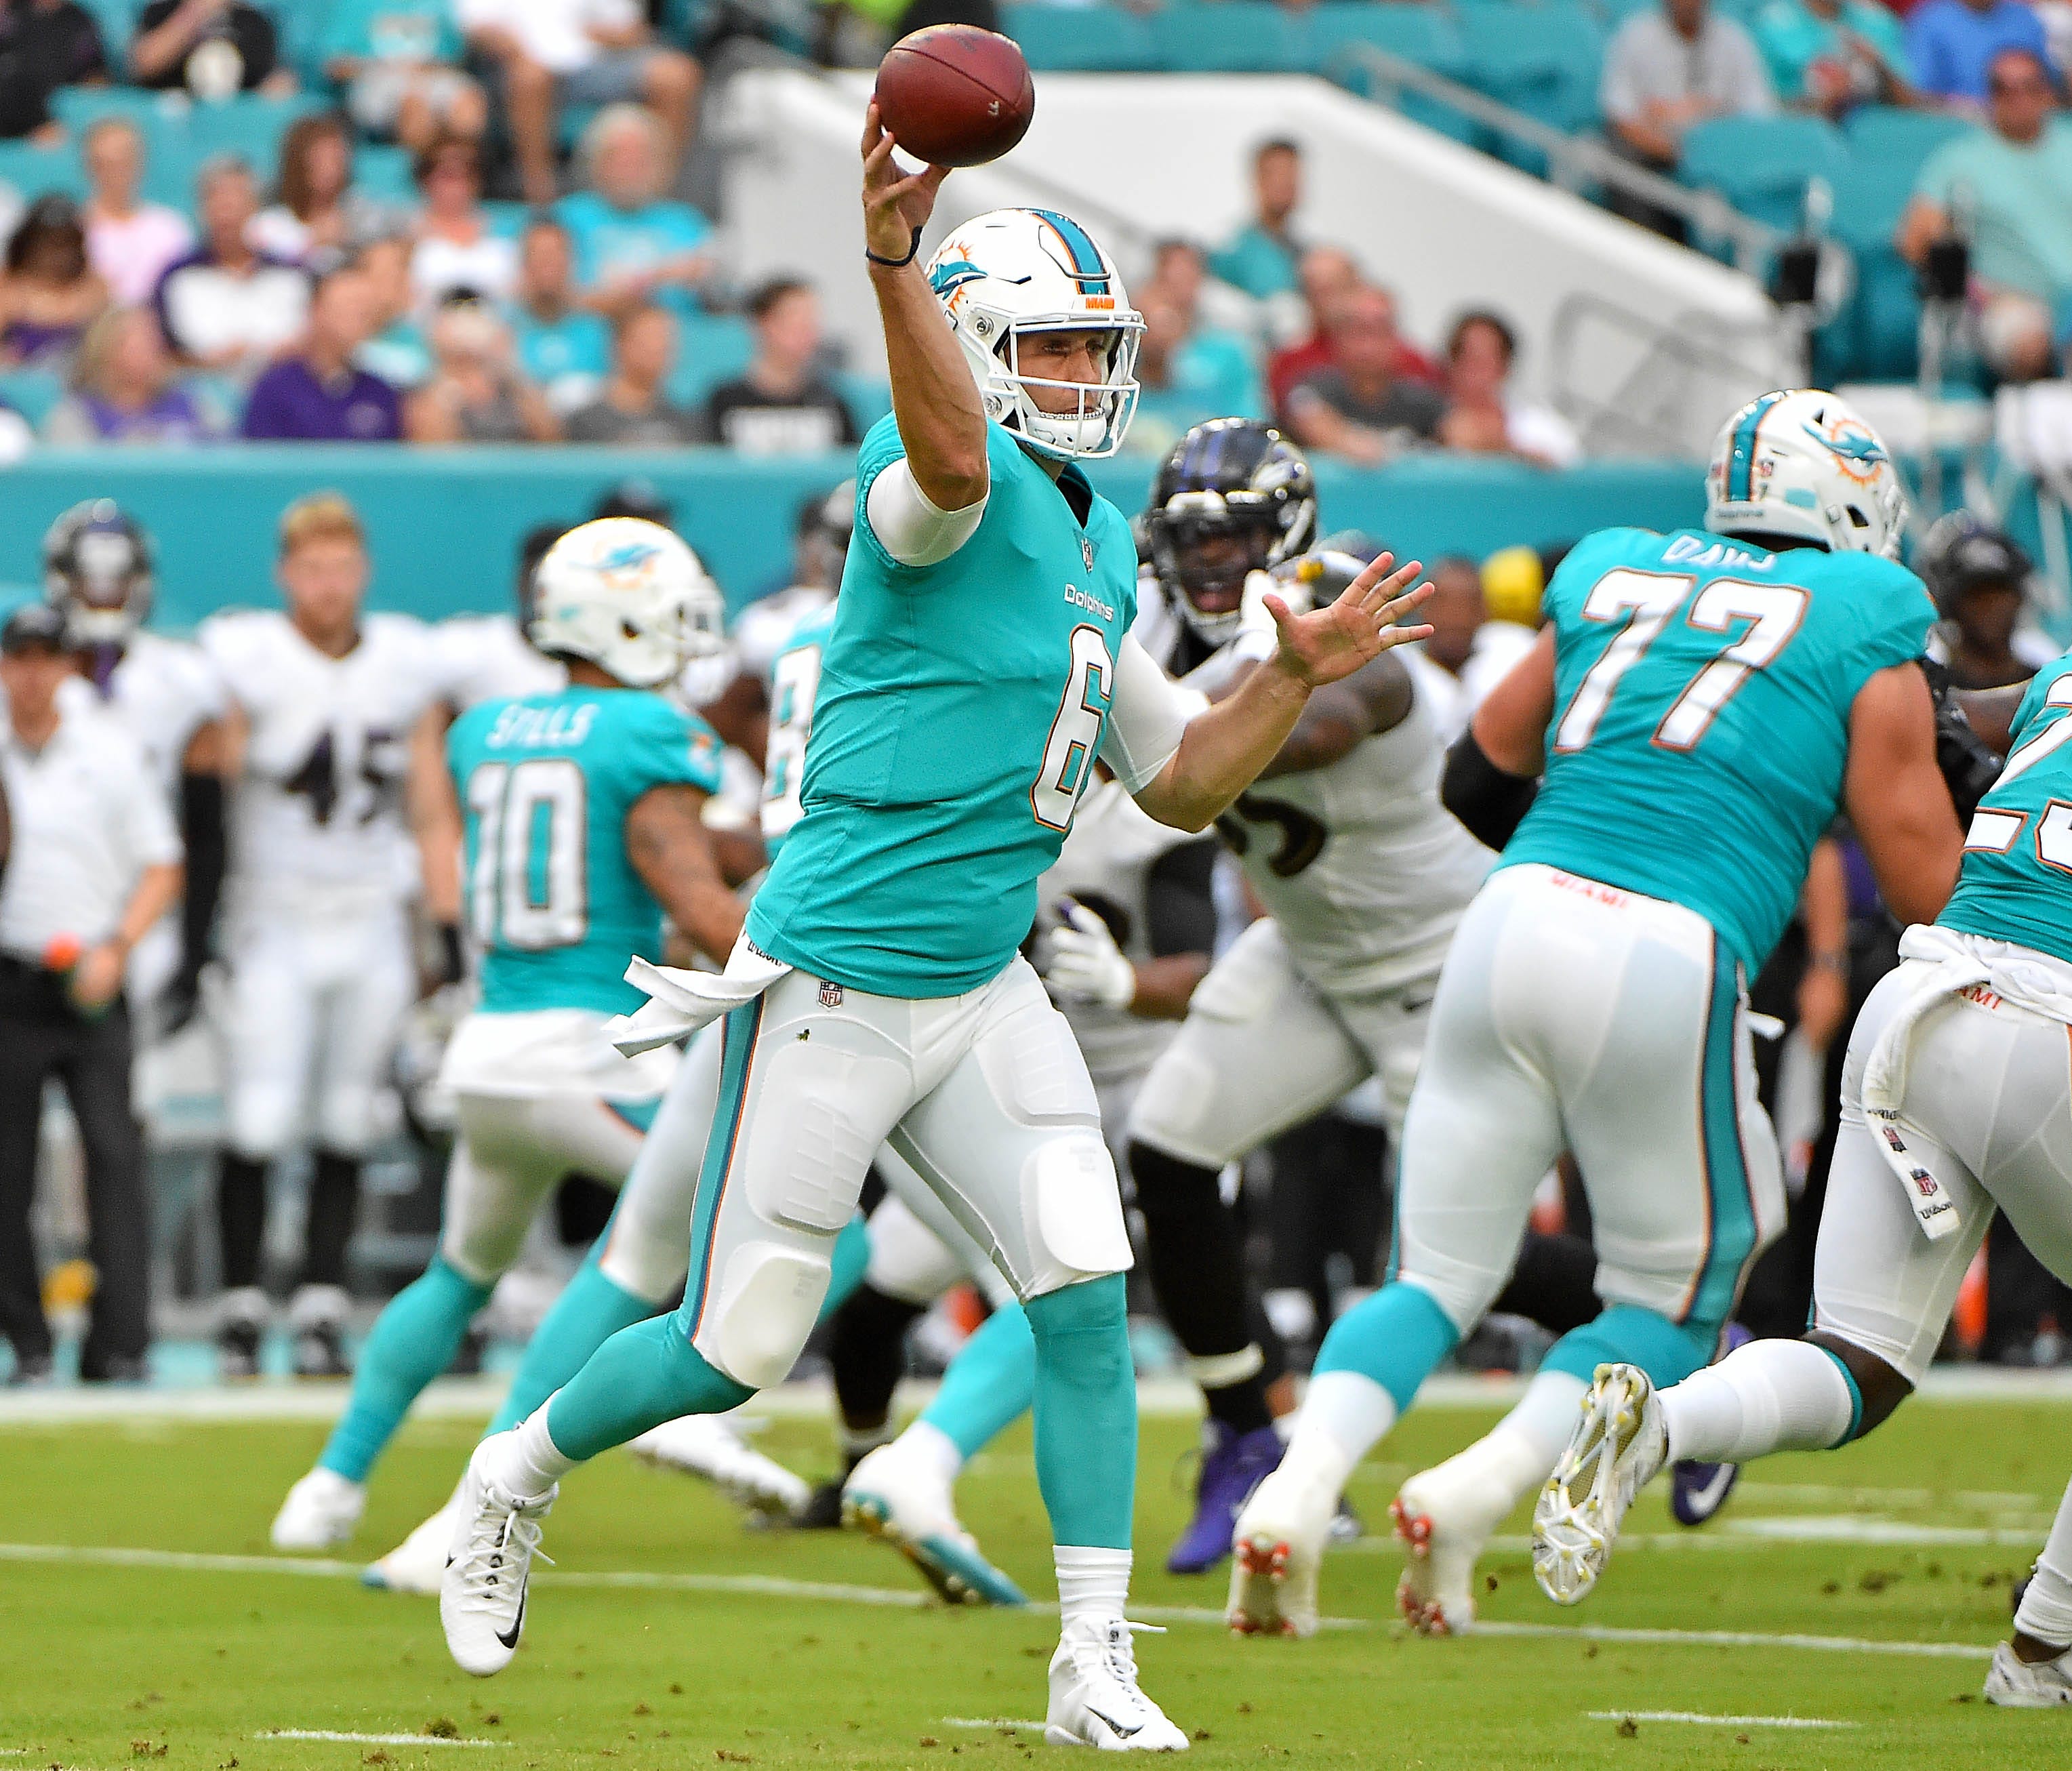 Miami Dolphins quarterback Jay Cutler (6) drops back to attempt a pass against the Baltimore Ravens during the first half at Hard Rock Stadium.